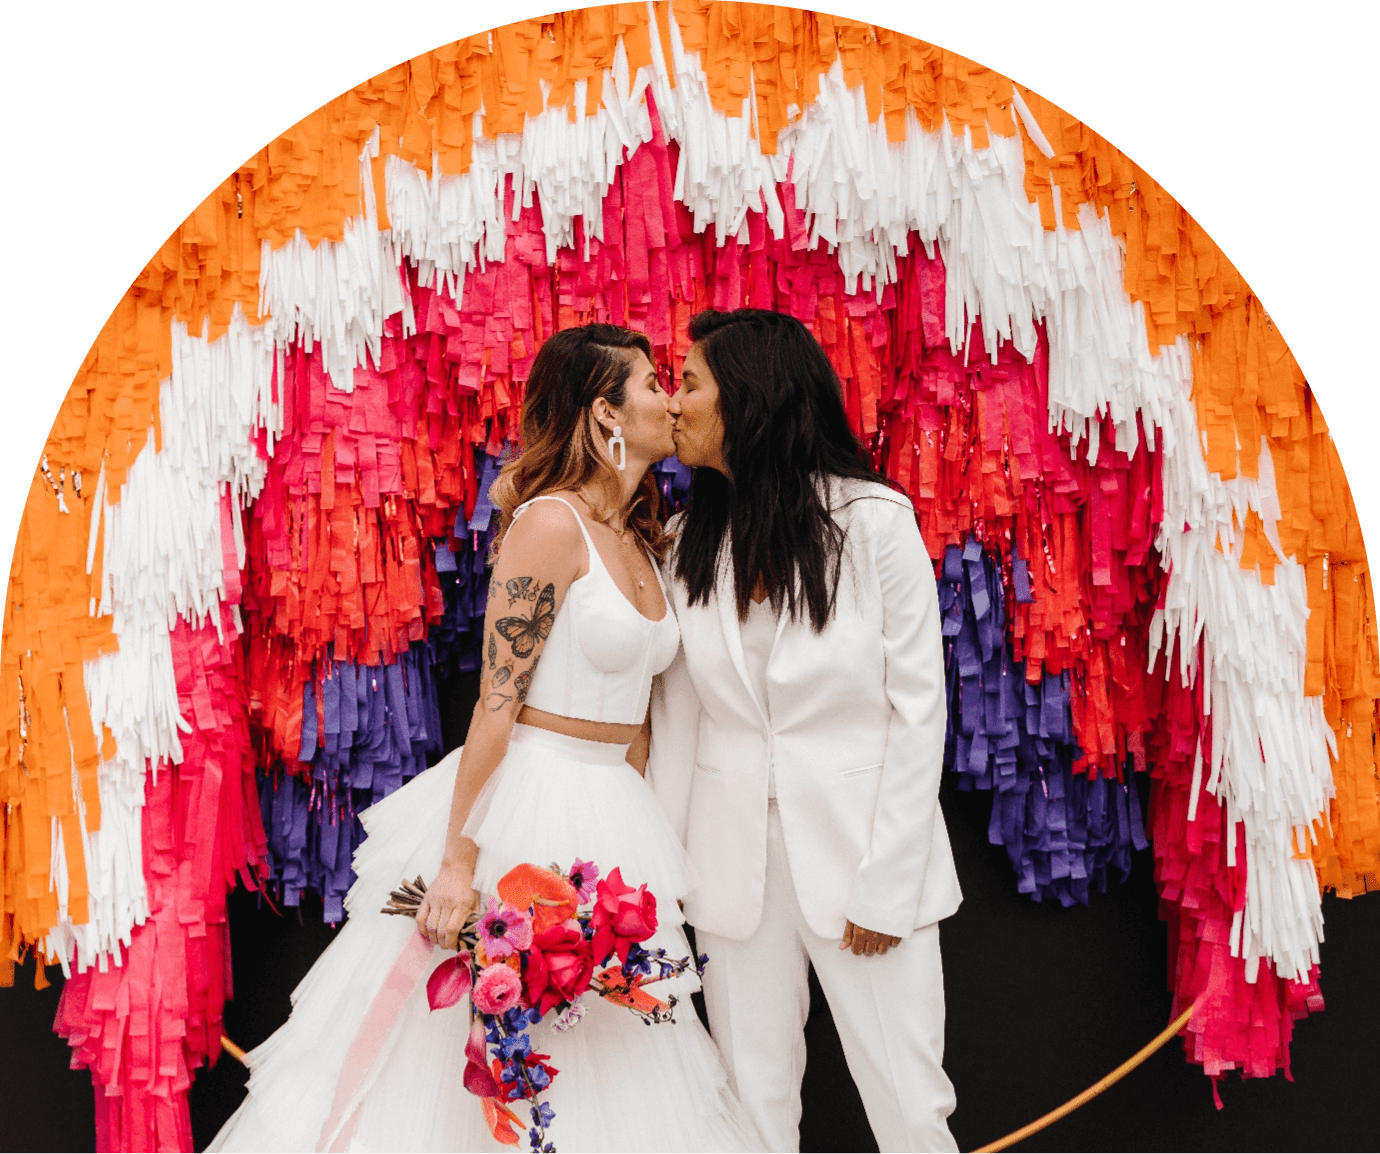 Two brides pose in front of a colorful streamer arch wedding photo backdrop.